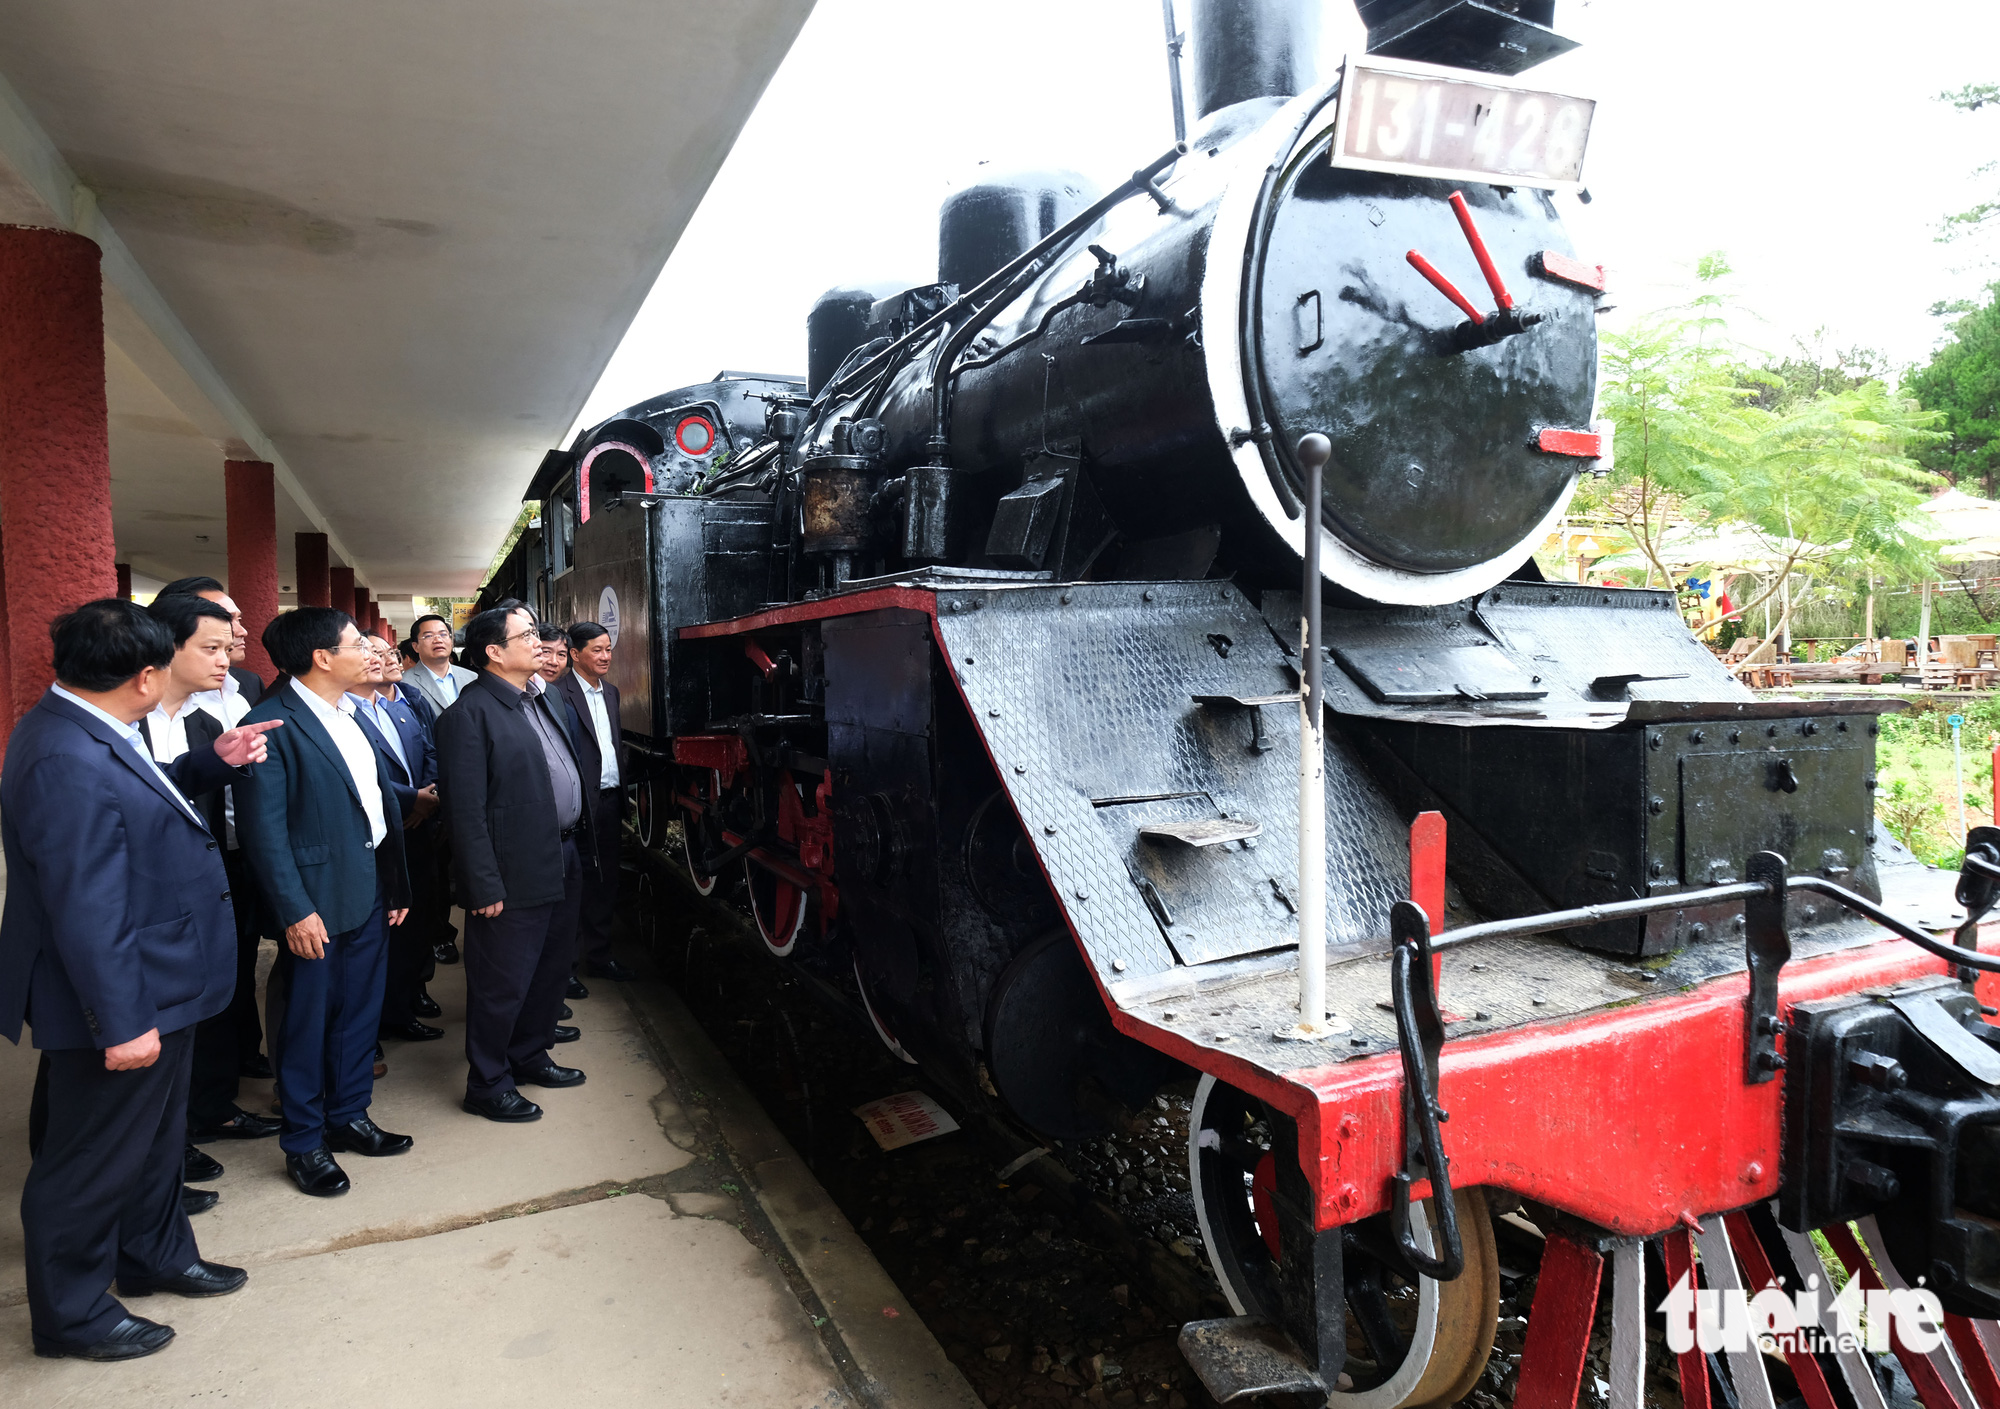 Vietnamese Prime Minister Pham Minh Chinh (first row, 1st) inspects the status of Da Lat railway station during his business trip to Lam Dong Province, November, 2022. Photo: M.V. / Tuoi Tre